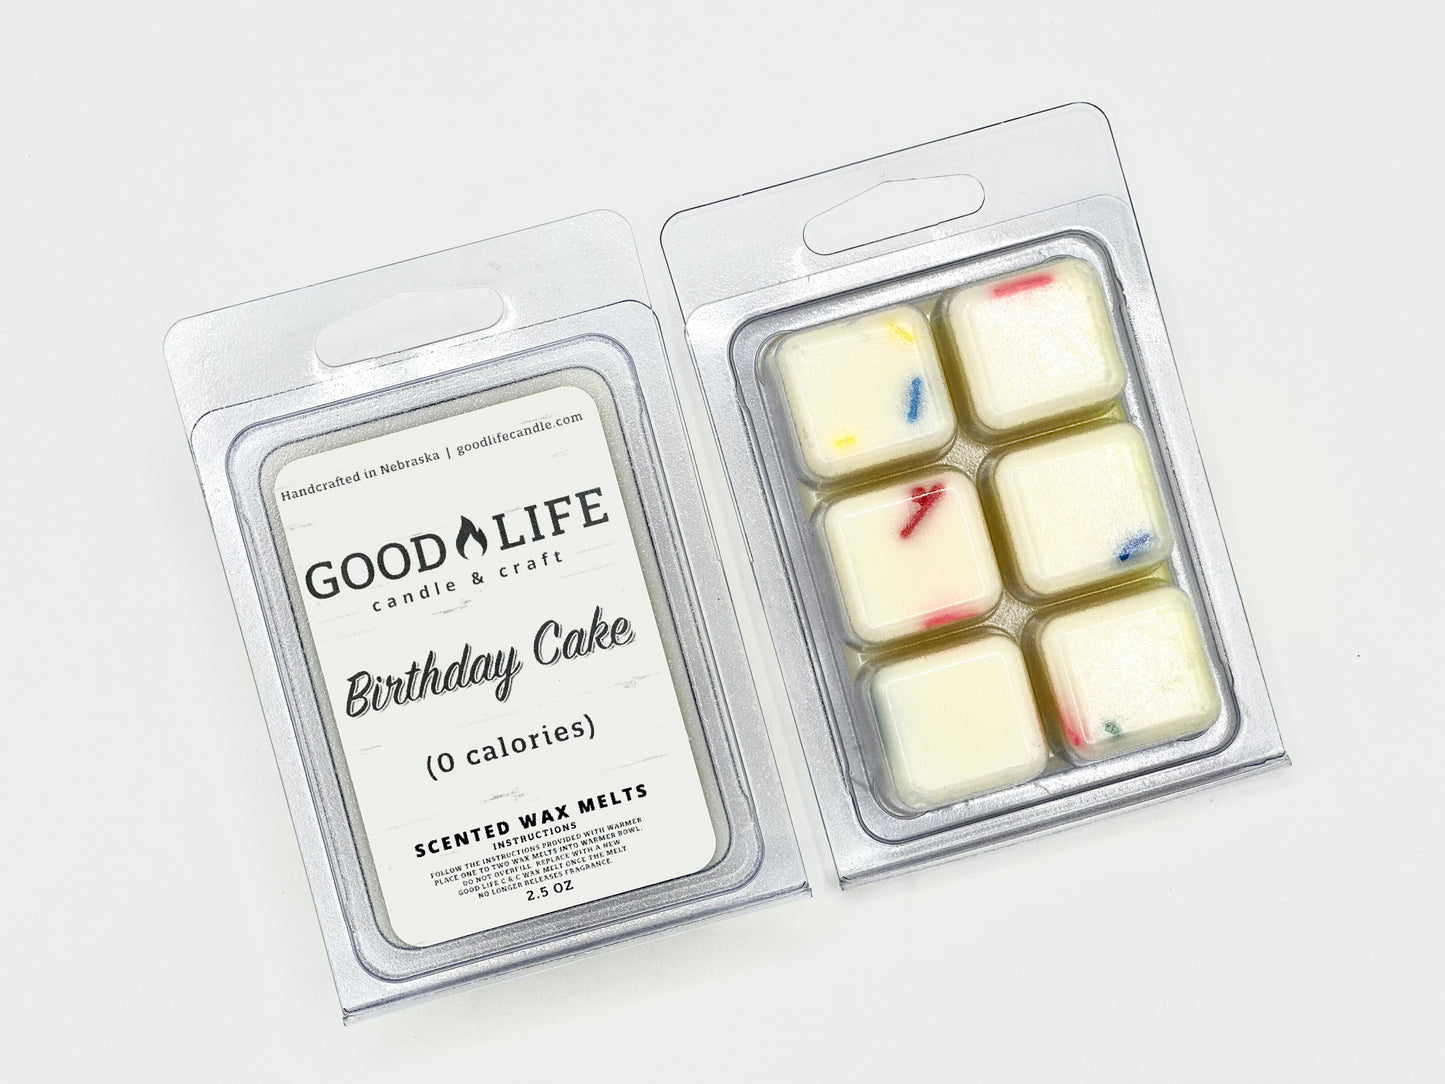 Birthday Cake (0 Calories) Scented Wax Melts